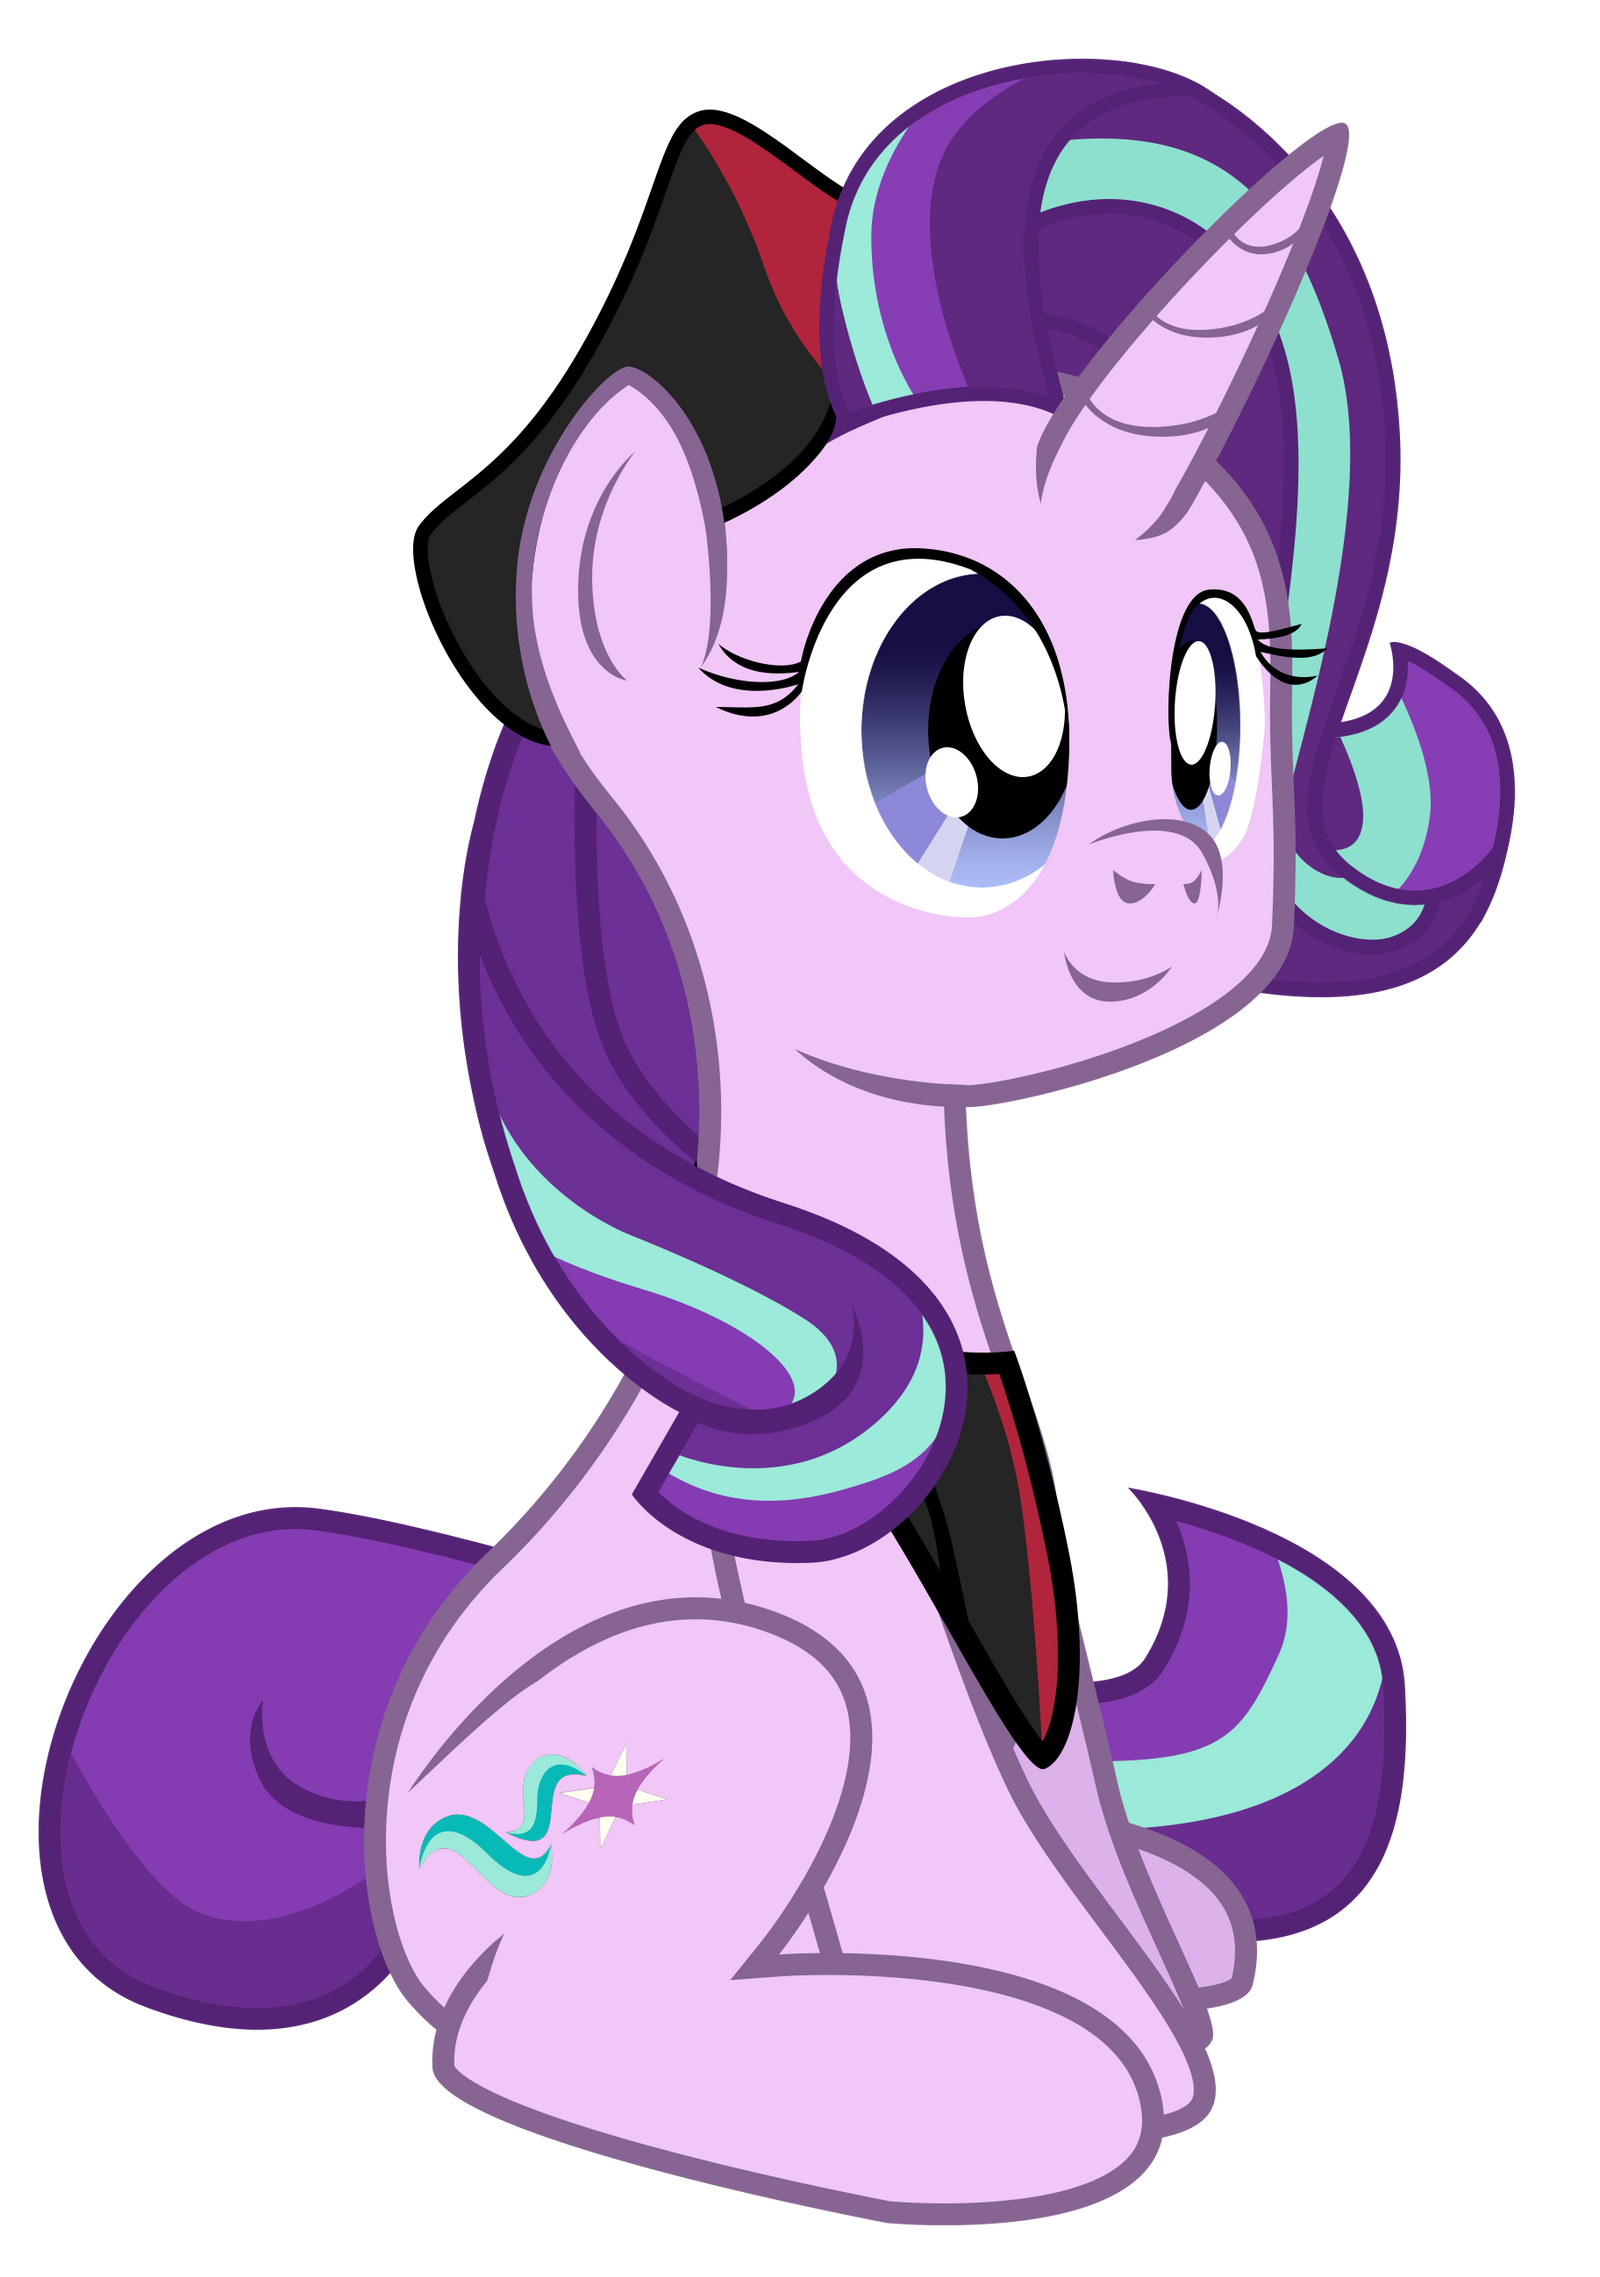 glimmer_glammers_by_aaronmk-dbk75vo.png